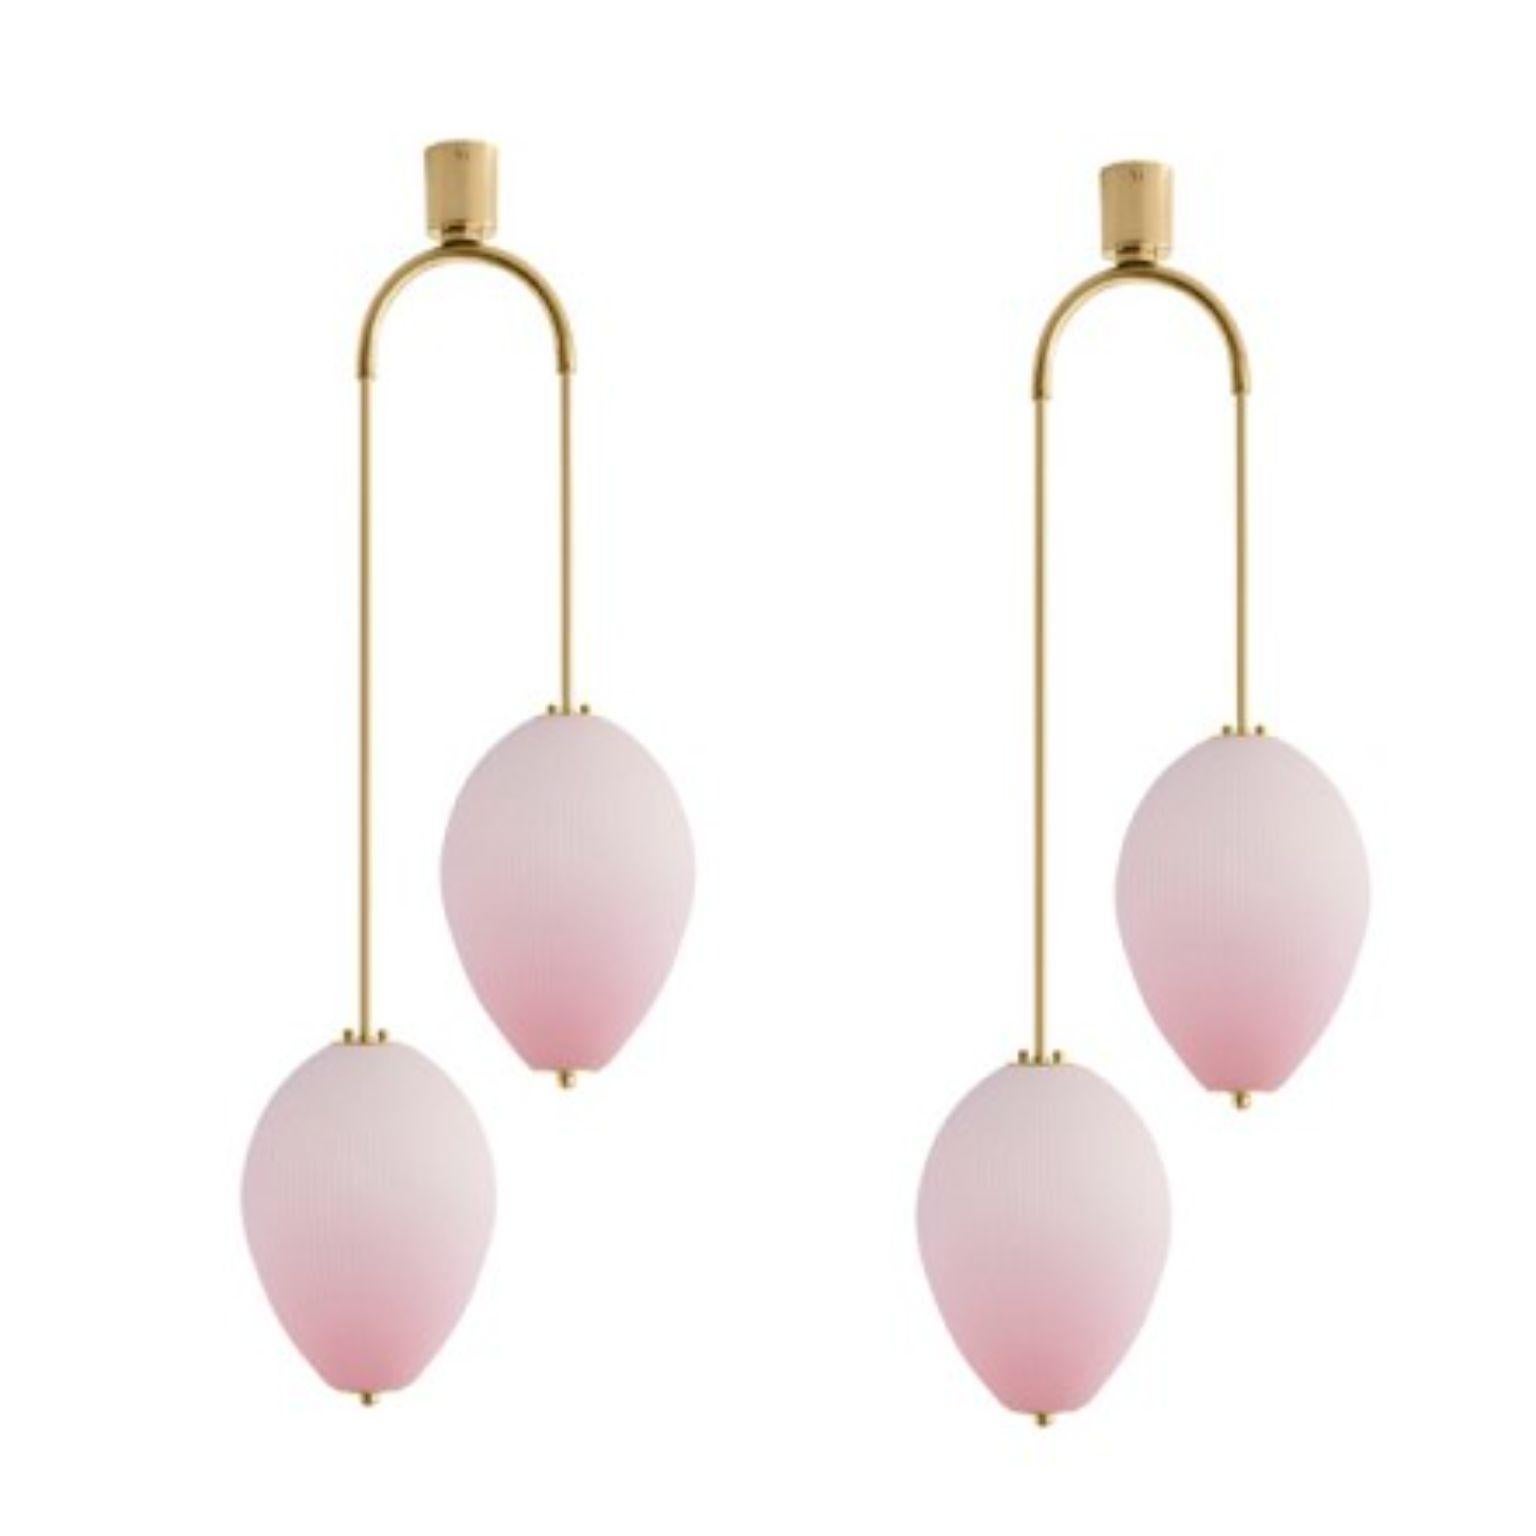 Double chandelier China 10 by Magic Circus Editions
Dimensions: H 121.5 x W 44.3 x D 25.2 cm
Materials: Brass, mouth blown glass sculpted with a diamond saw
Colour: soft rose

Available finishes: Brass, nickel
Available colours: enamel soft white,